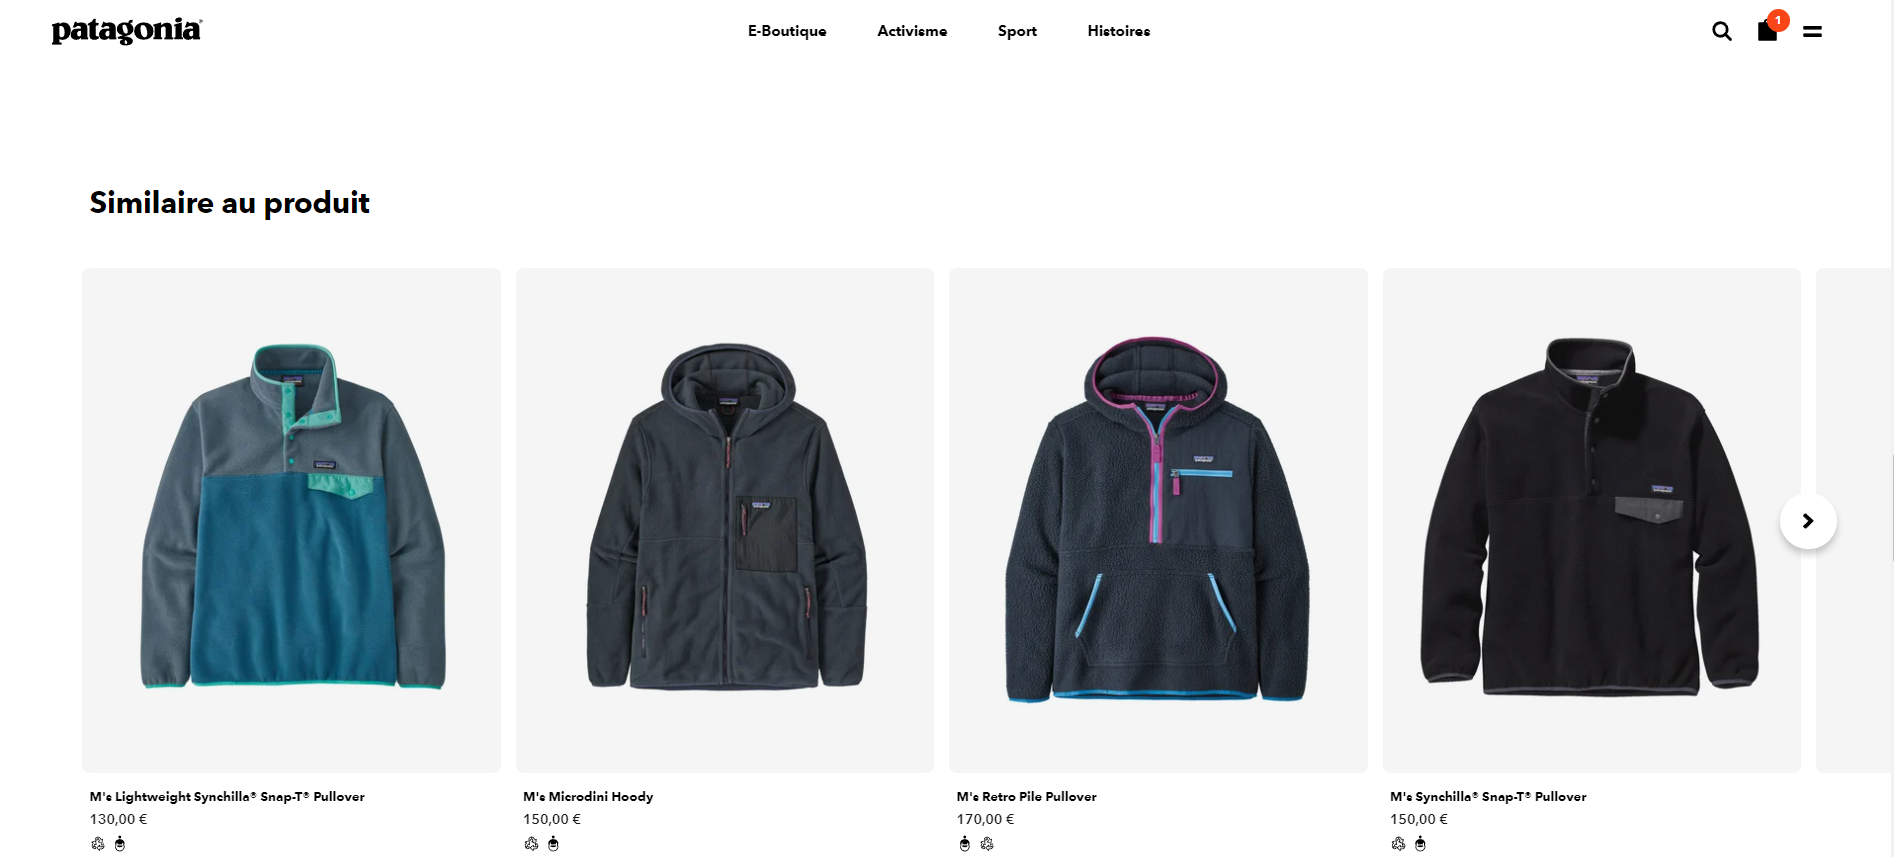 cross-selling-exemple-patagonia